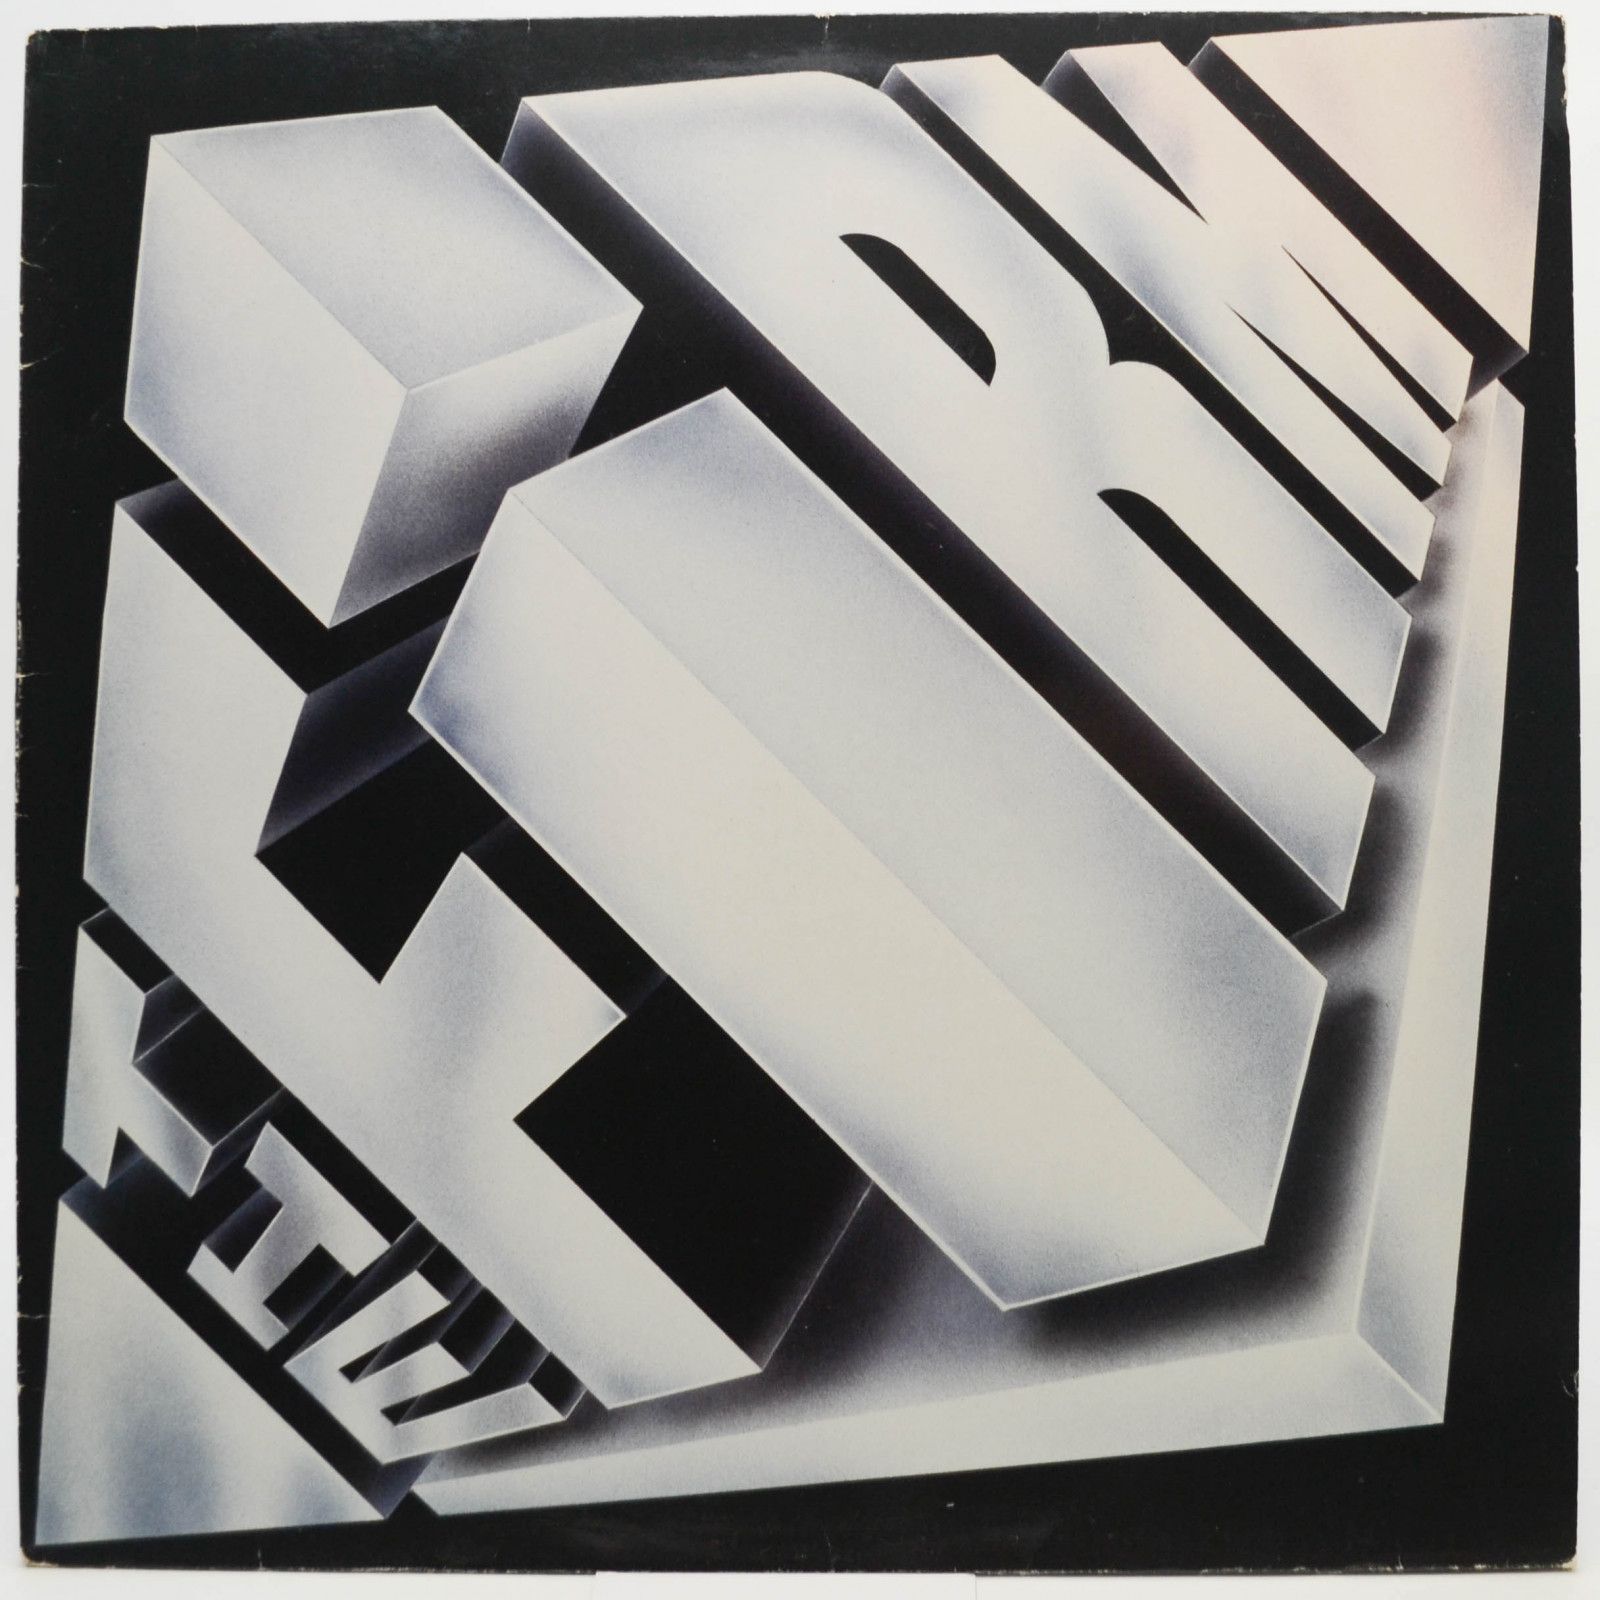 Firm — The Firm, 1985